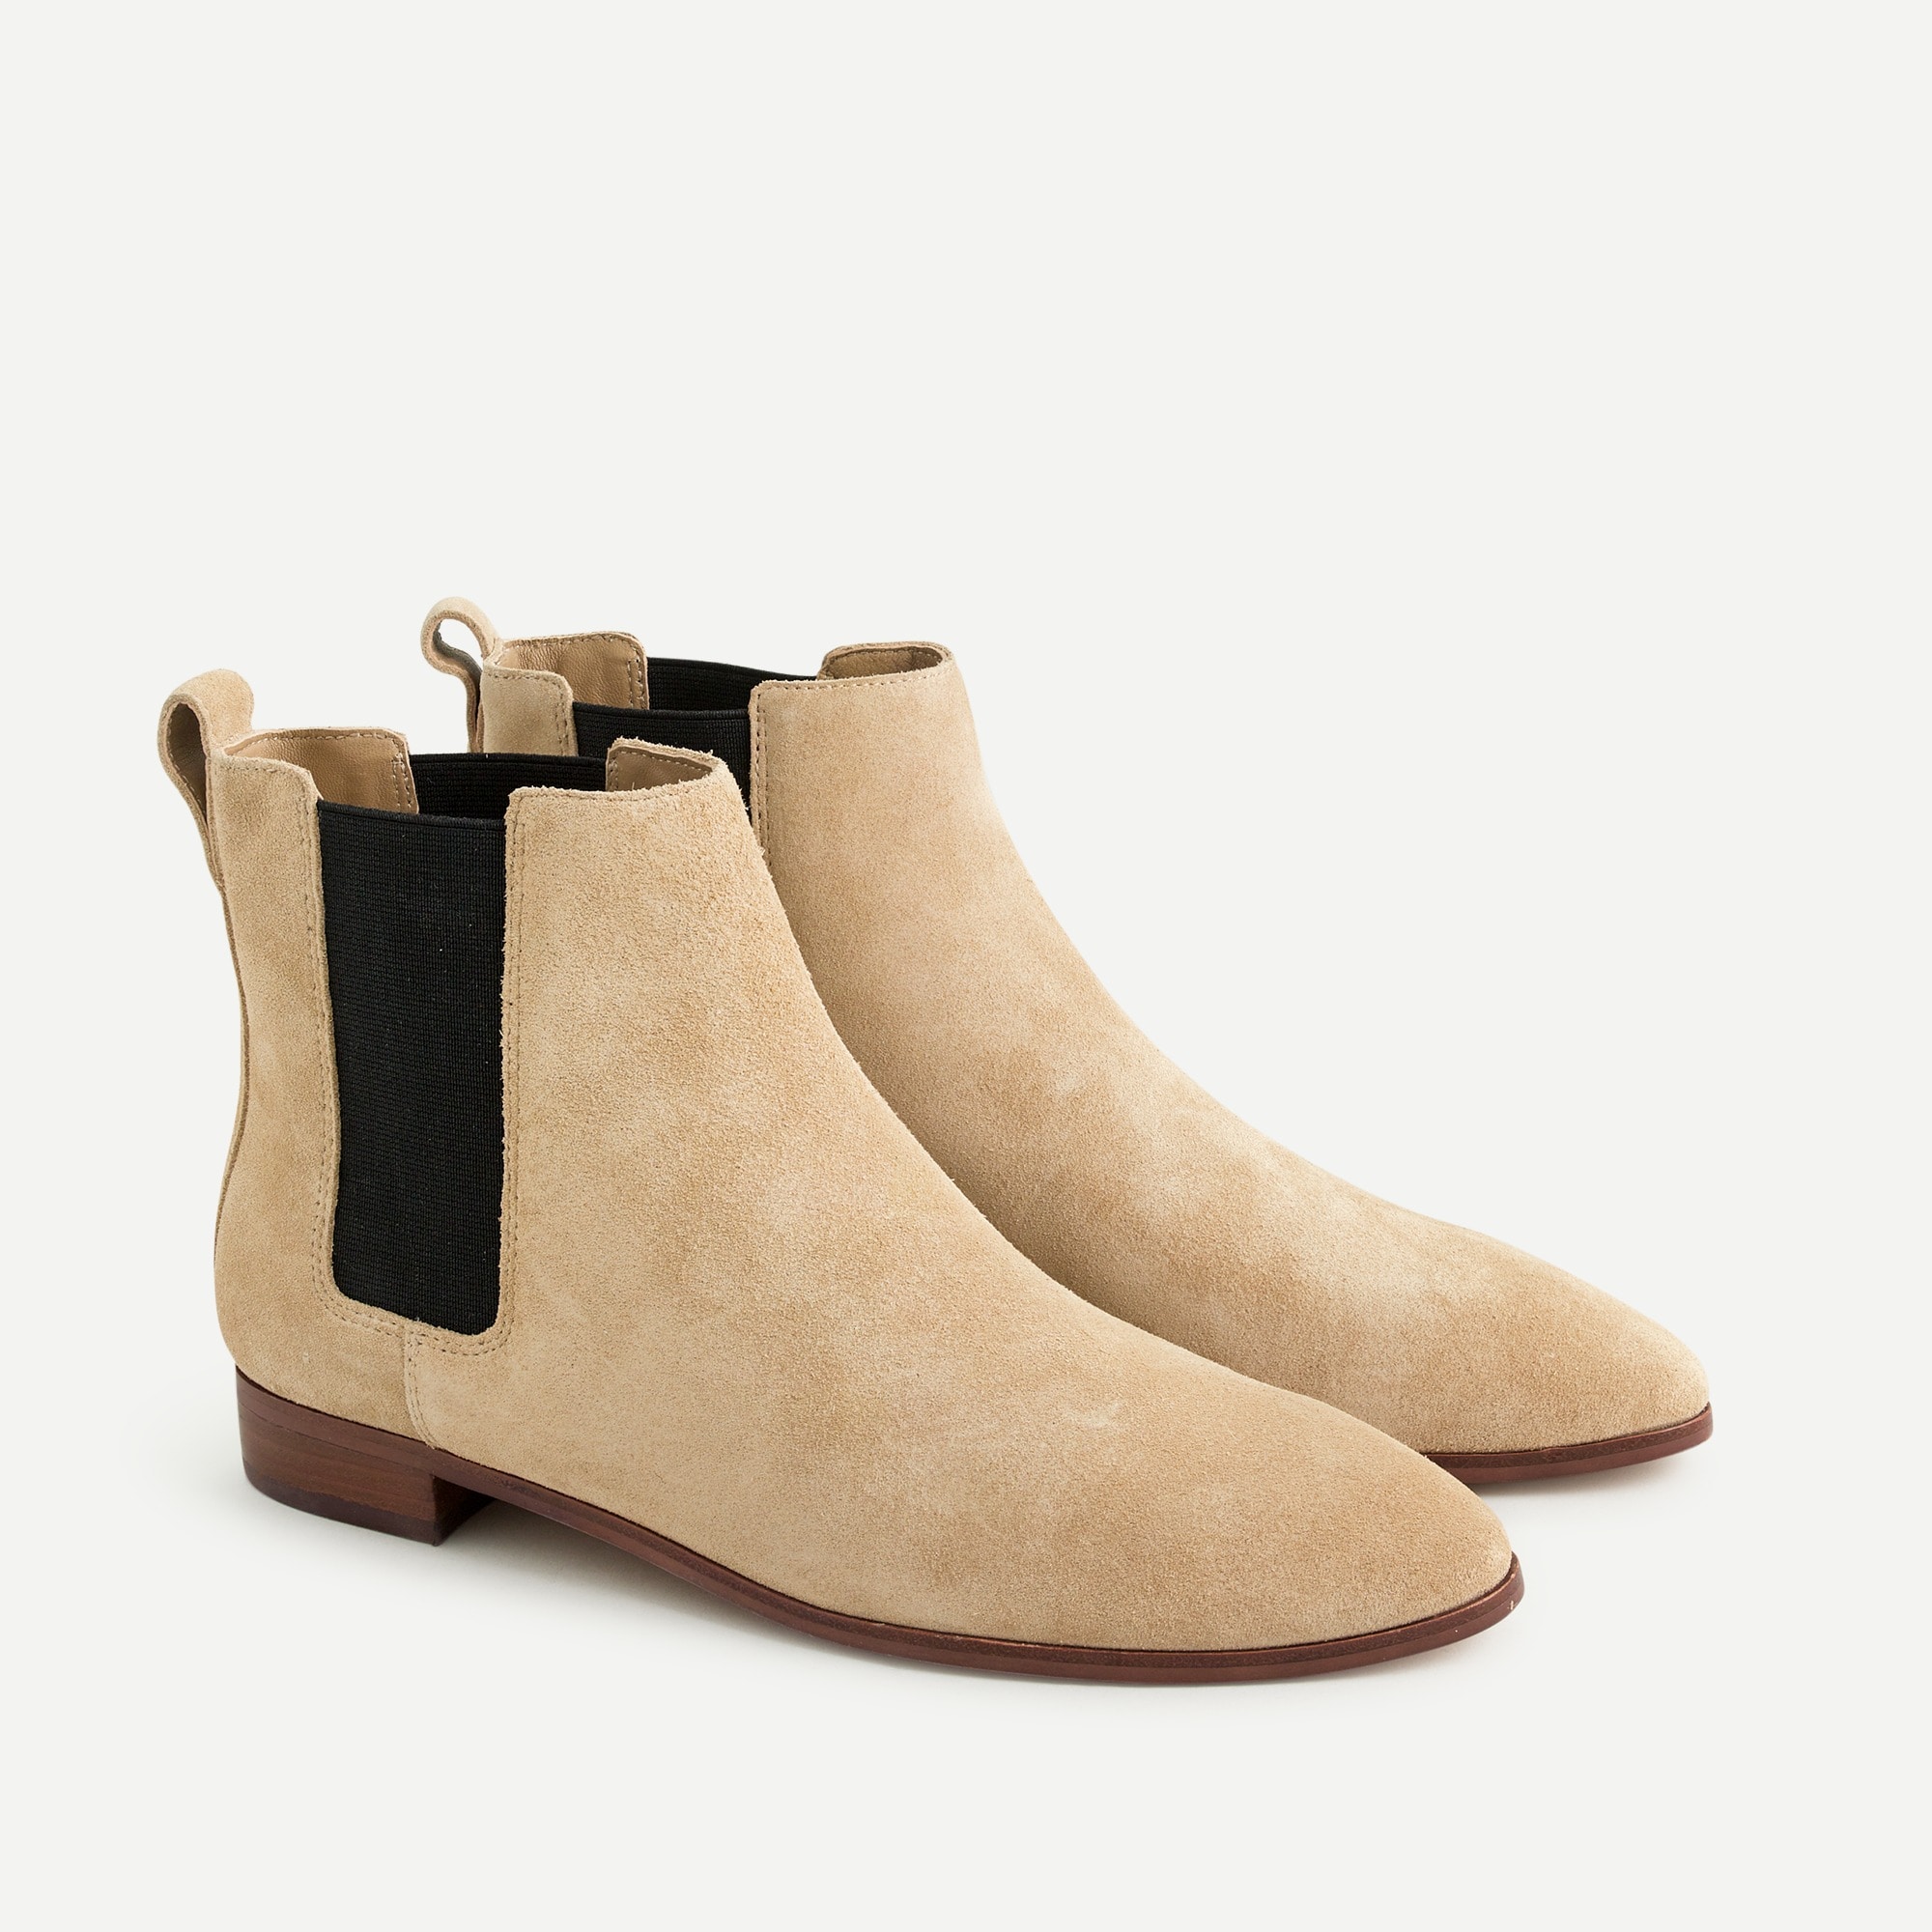 pull on suede boots